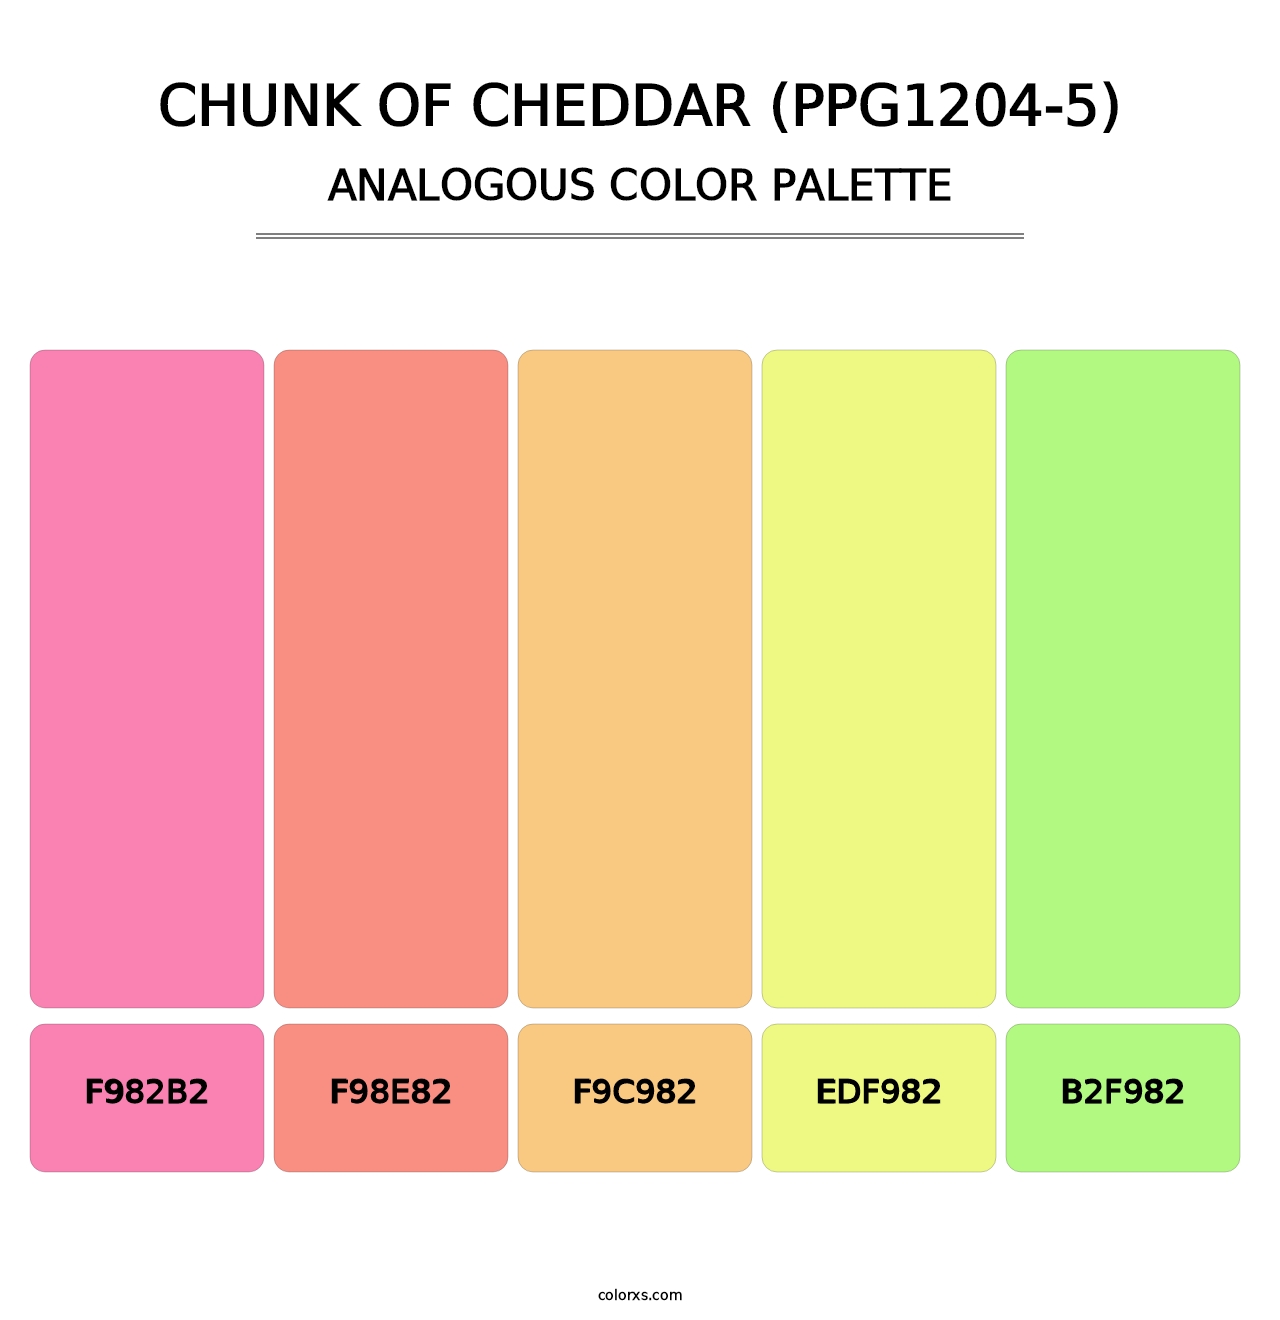 Chunk Of Cheddar (PPG1204-5) - Analogous Color Palette